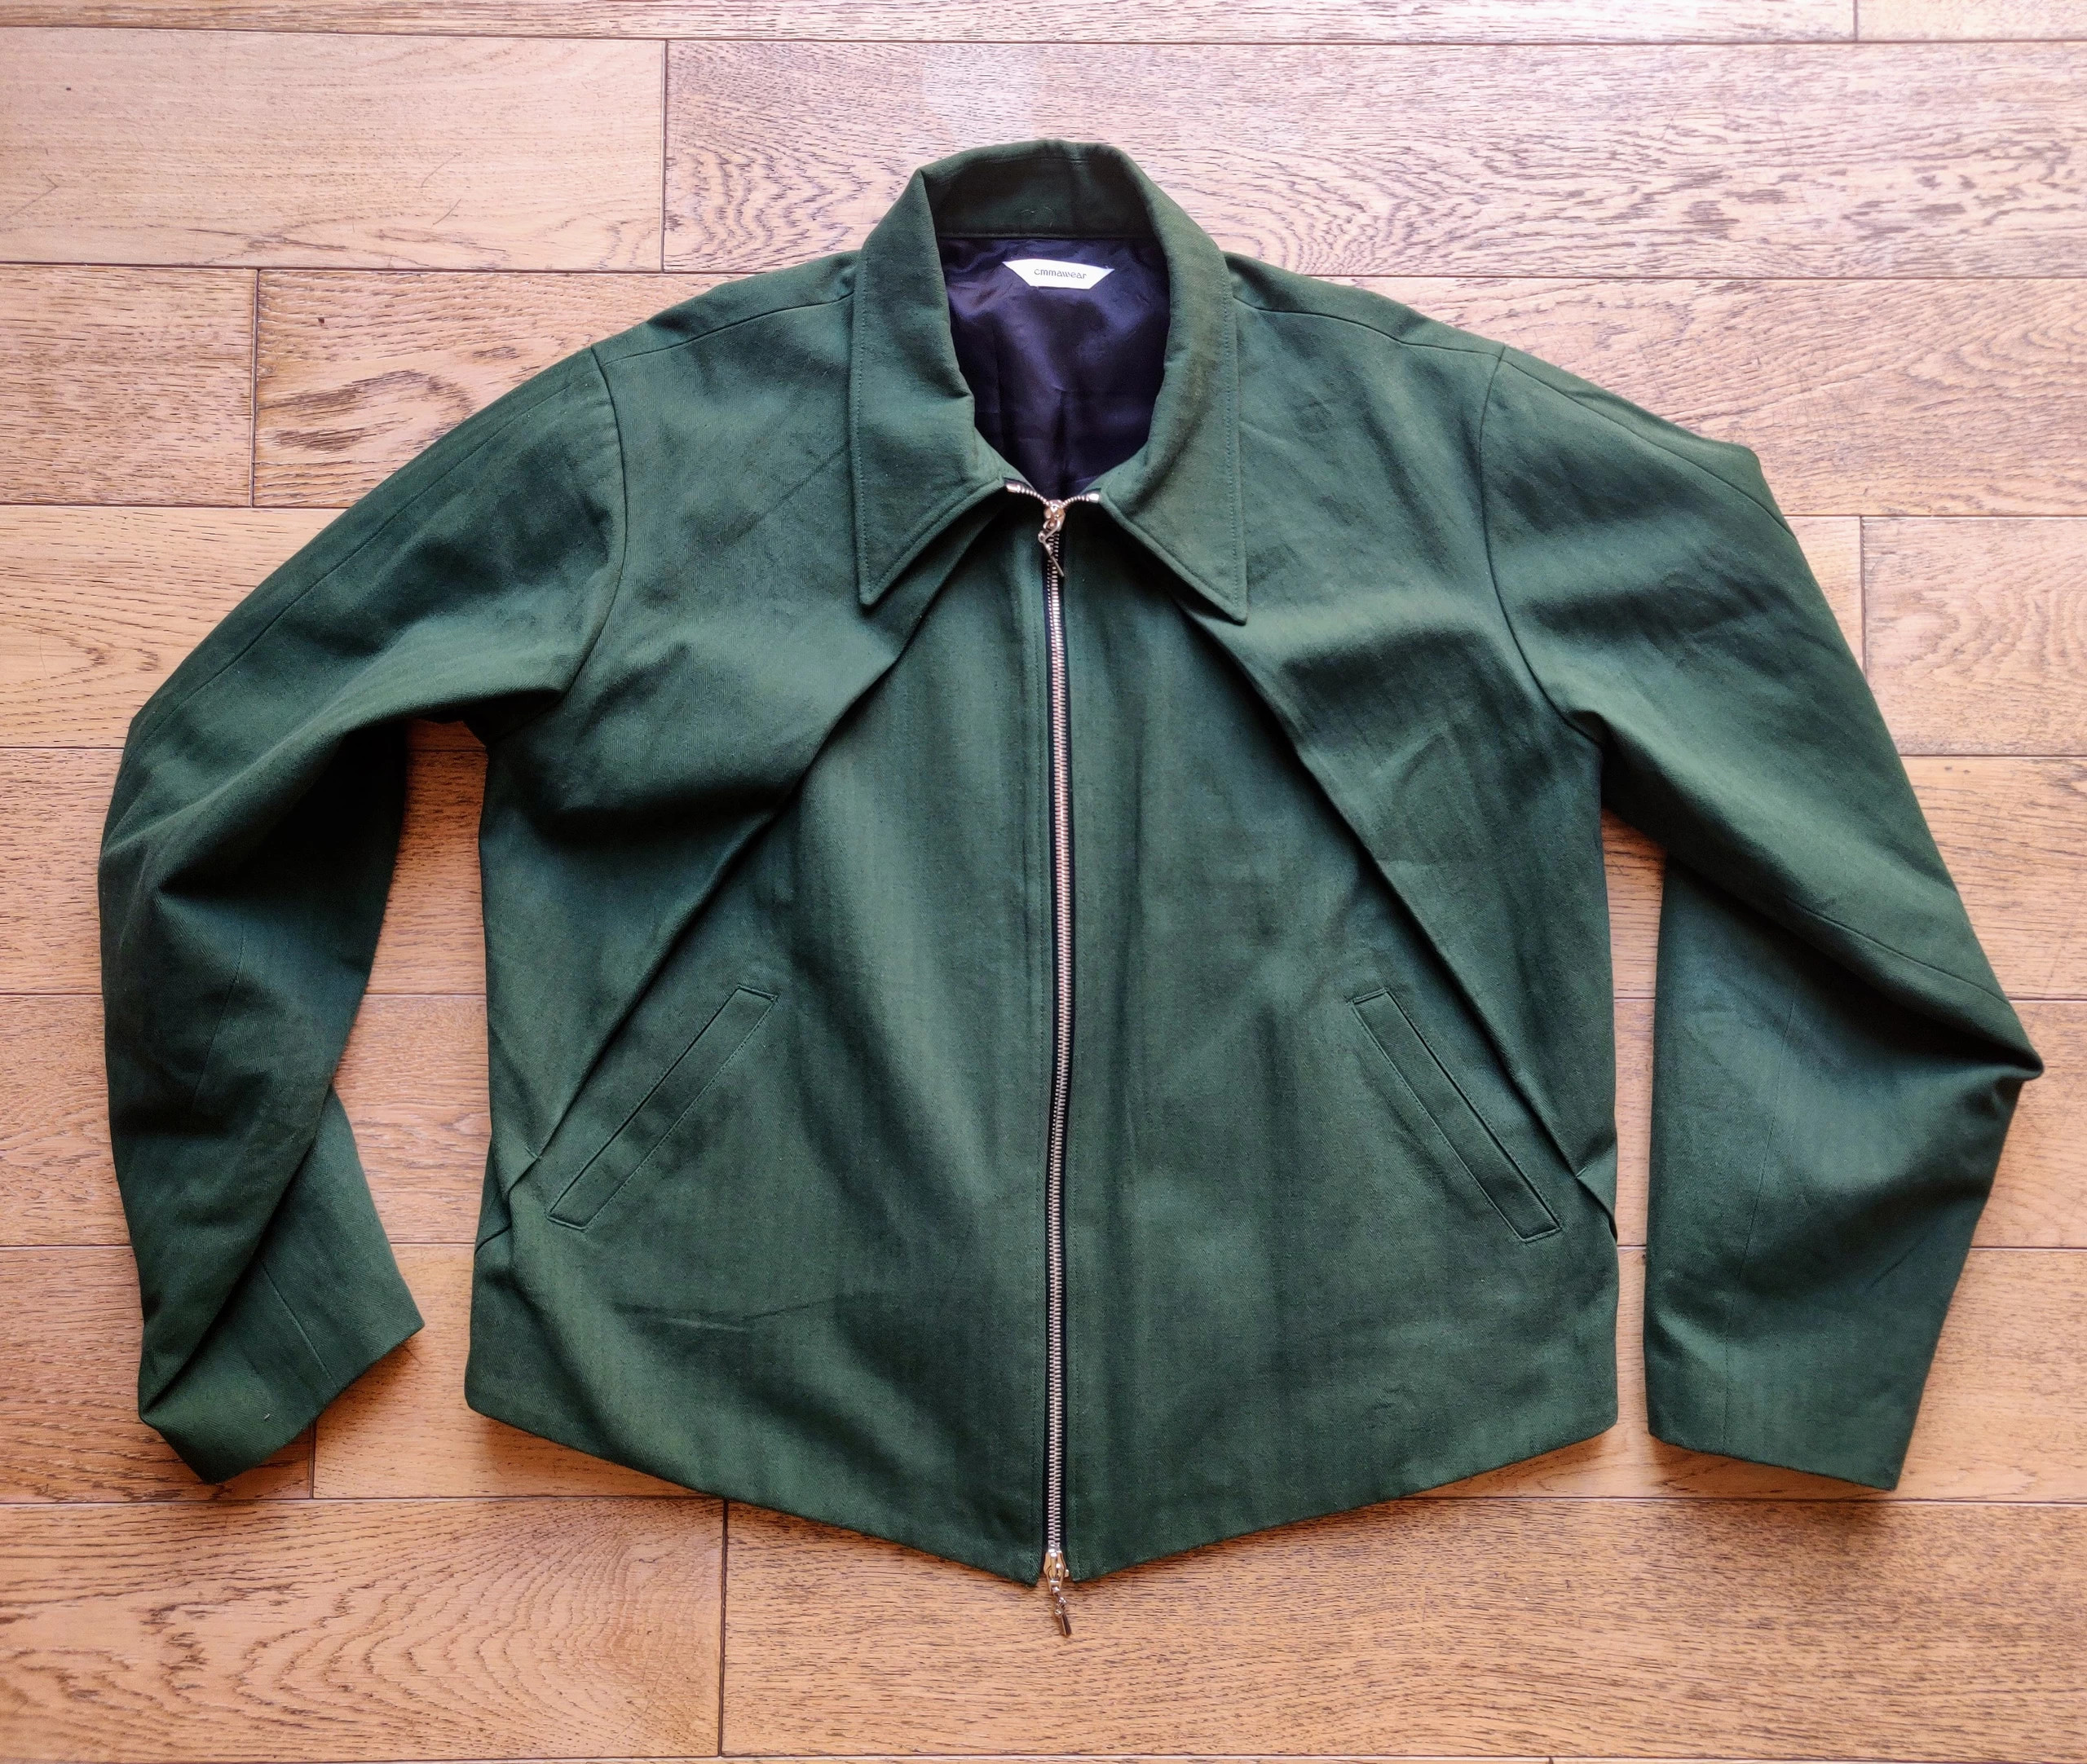 Cmmawear Crescent cut tailored jacket | Vinted